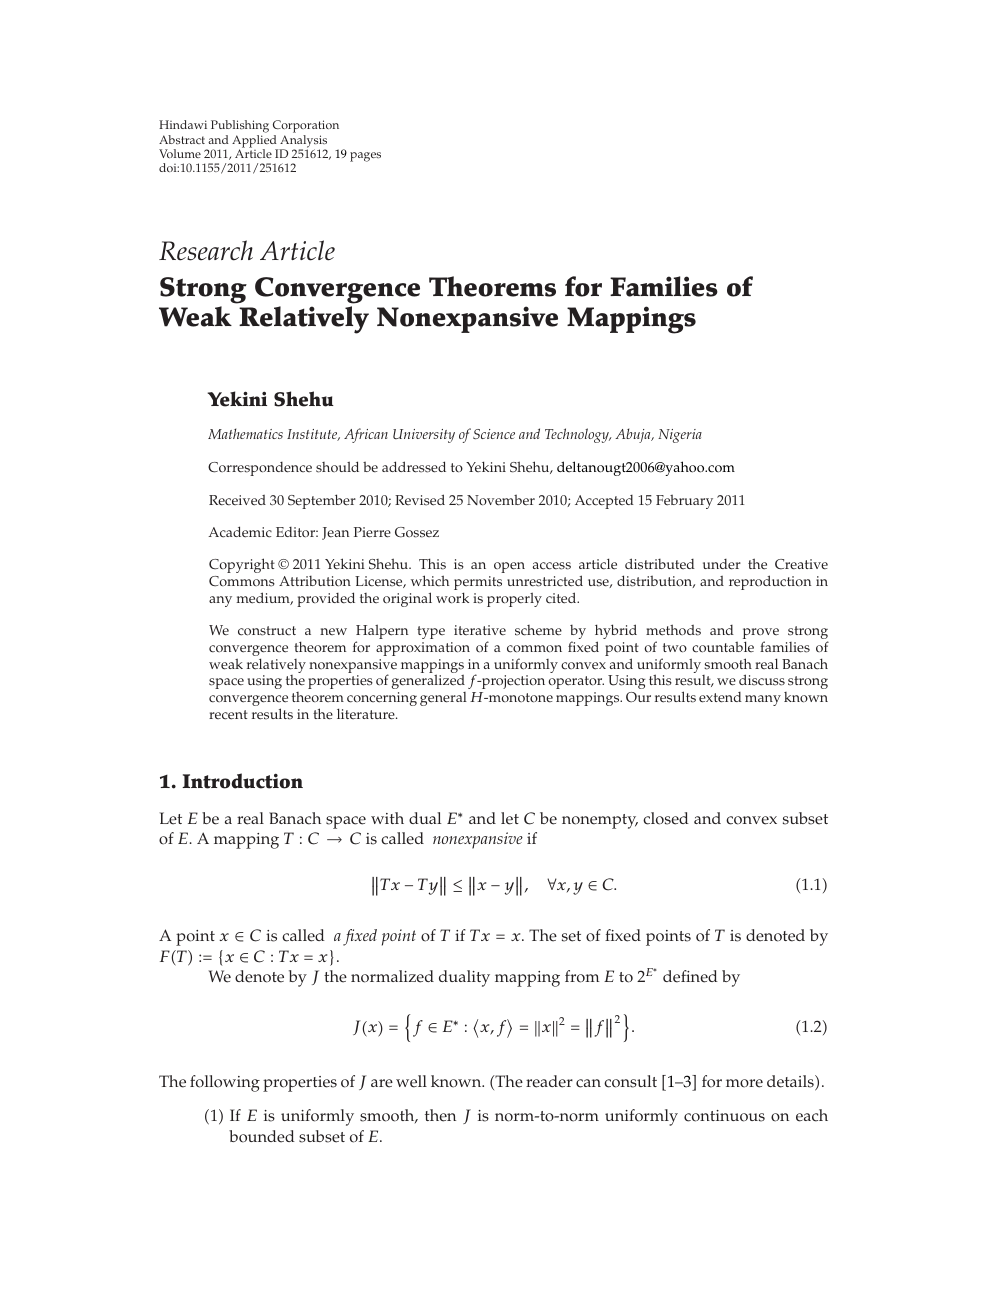 Strong Convergence Theorems For Families Of Weak Relatively Nonexpansive Mappings Topic Of Research Paper In Mathematics Download Scholarly Article Pdf And Read For Free On Cyberleninka Open Science Hub